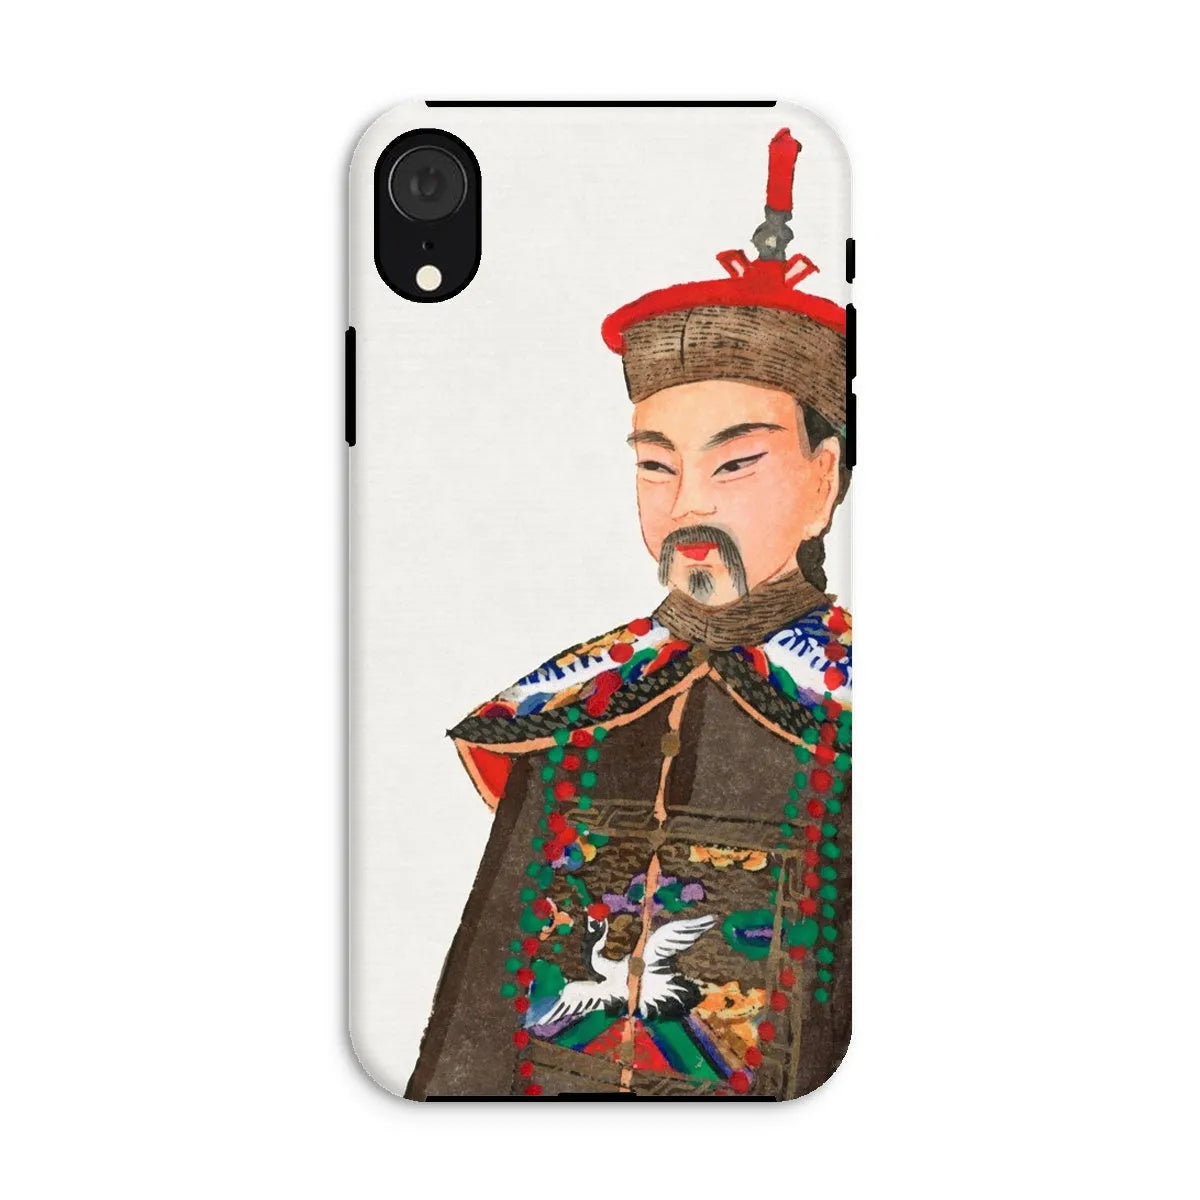 Nobleman At Court - Chinese Aesthetic Manchu Art Phone Case - Iphone Xr / Matte - Mobile Phone Cases - Aesthetic Art